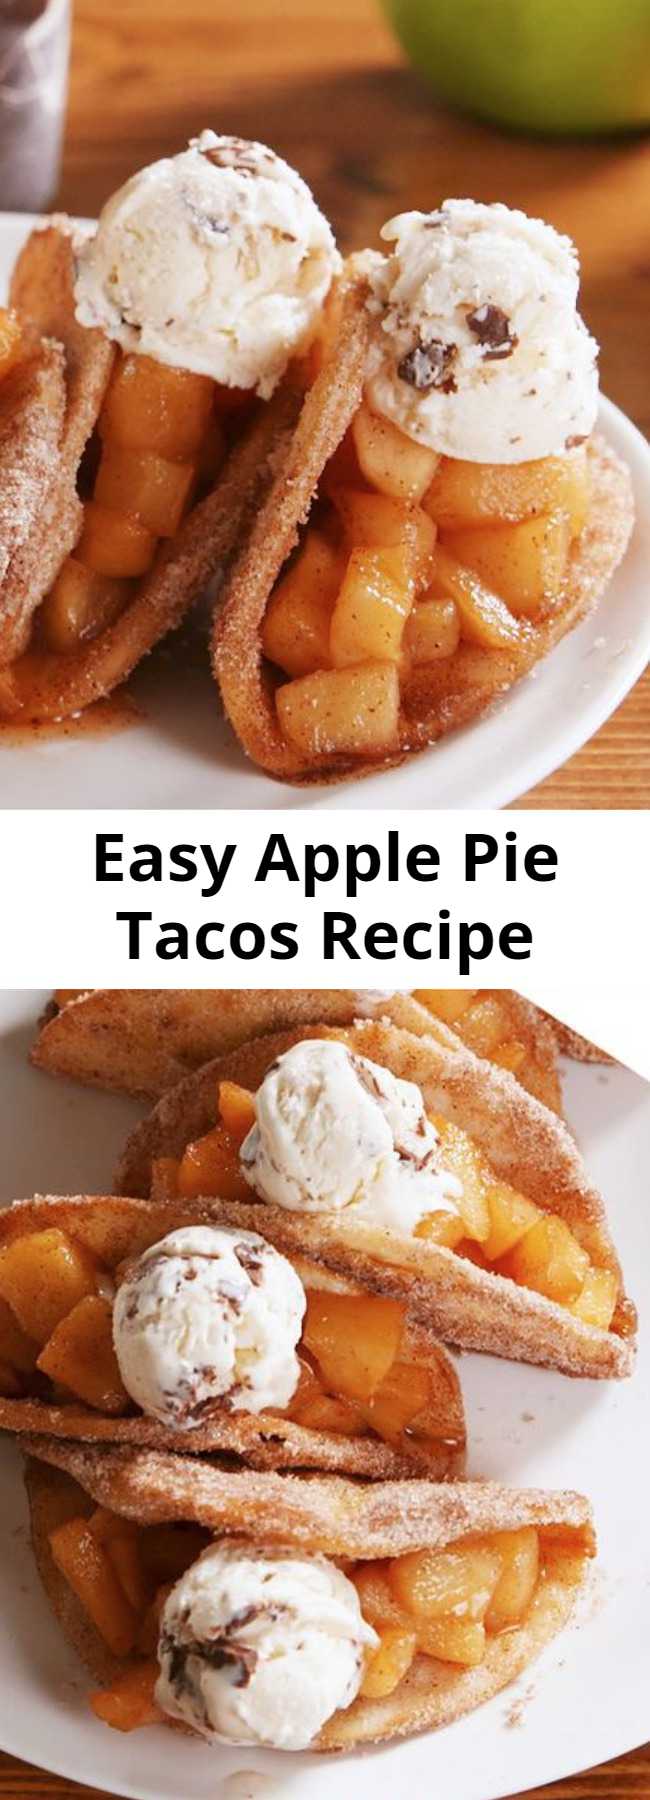 Easy Apple Pie Tacos Recipe - Don't be intimidated by the frying! It's actually easy. Once the tortilla hits the hot oil, it crisps up and keeps it shape quickly. Just know you'll need to use your tongs pretty much the whole time. #applepie #desserttacos #applepierecipes #apple #cinnamon #fruitdesserts #vanillaicecream